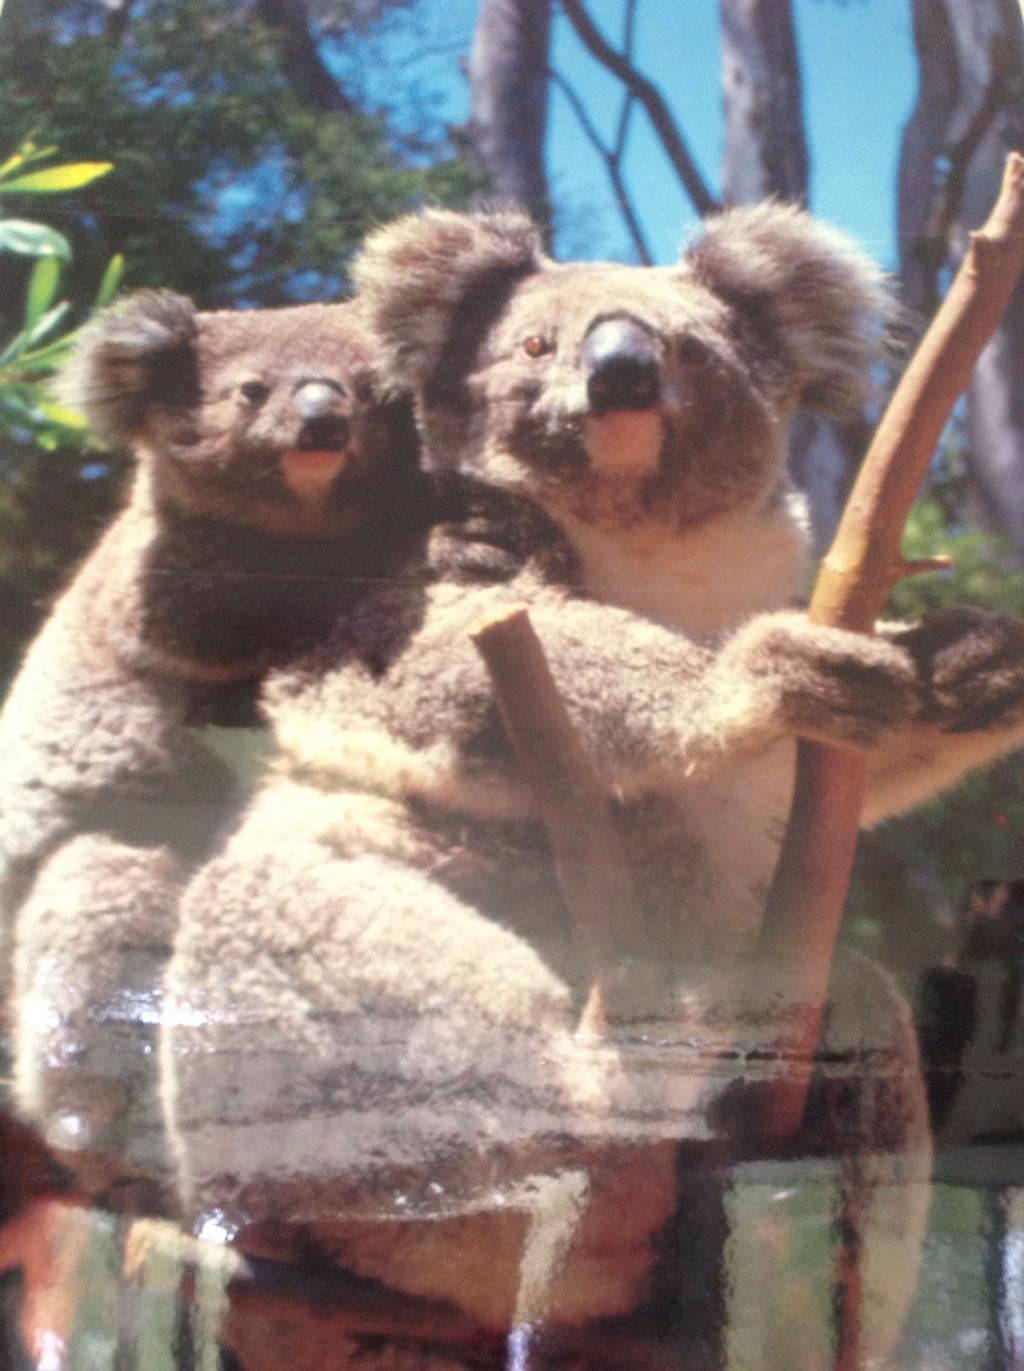 The two girls stood in the centre of the bush. They watched the workmen removing the green berry bush. The girls were glad it was gone because they didn't want to see any more koalas dying.